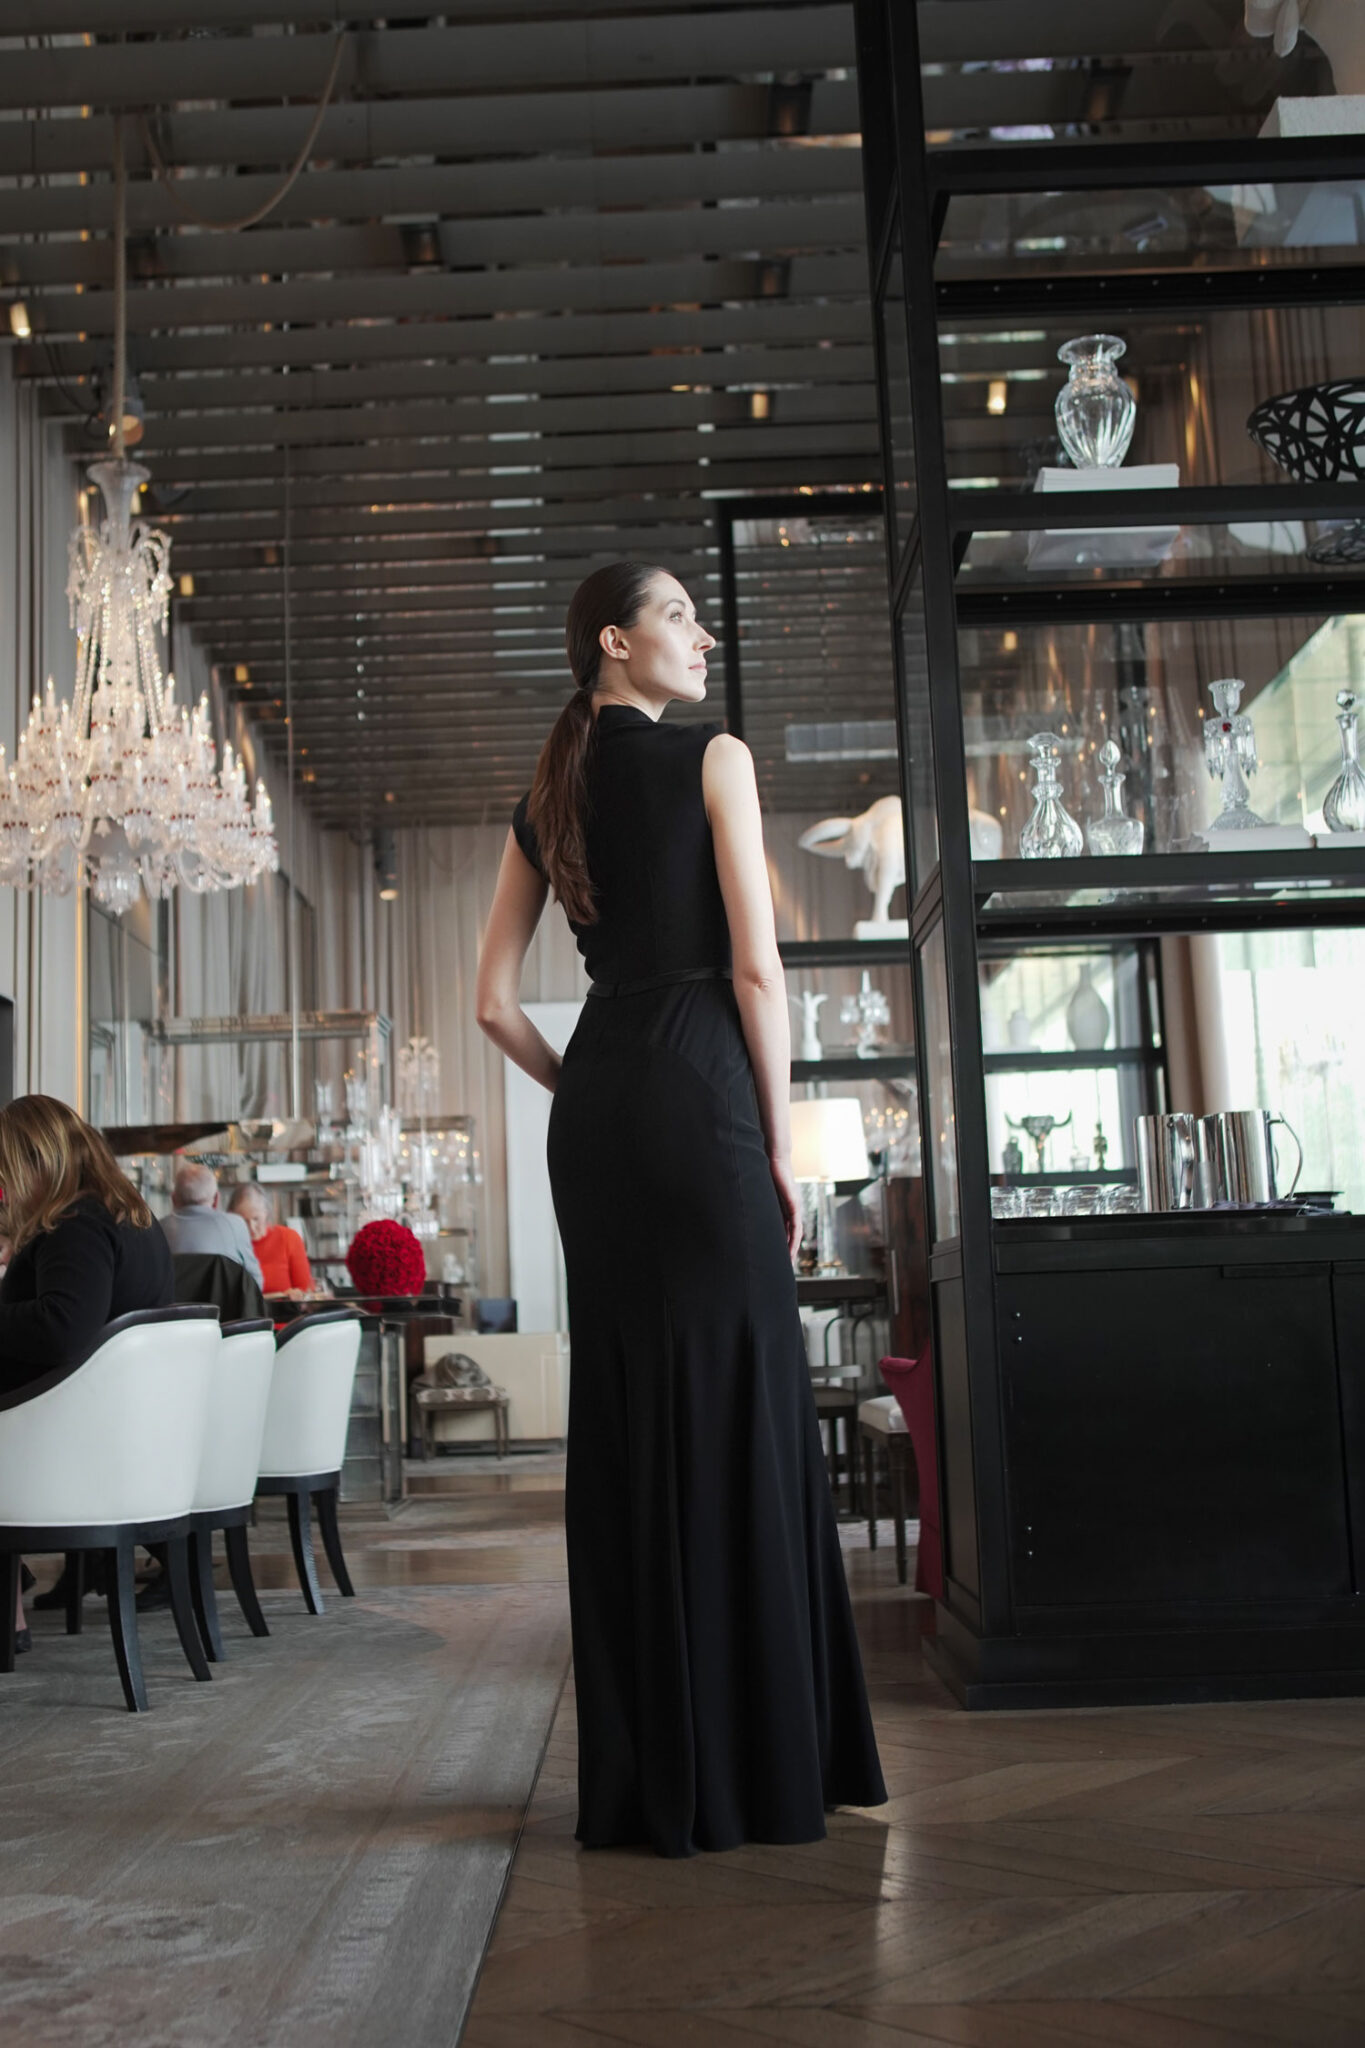 Promises Look 7 - Long-tailed dress in black, ready for special events - Verdin New York